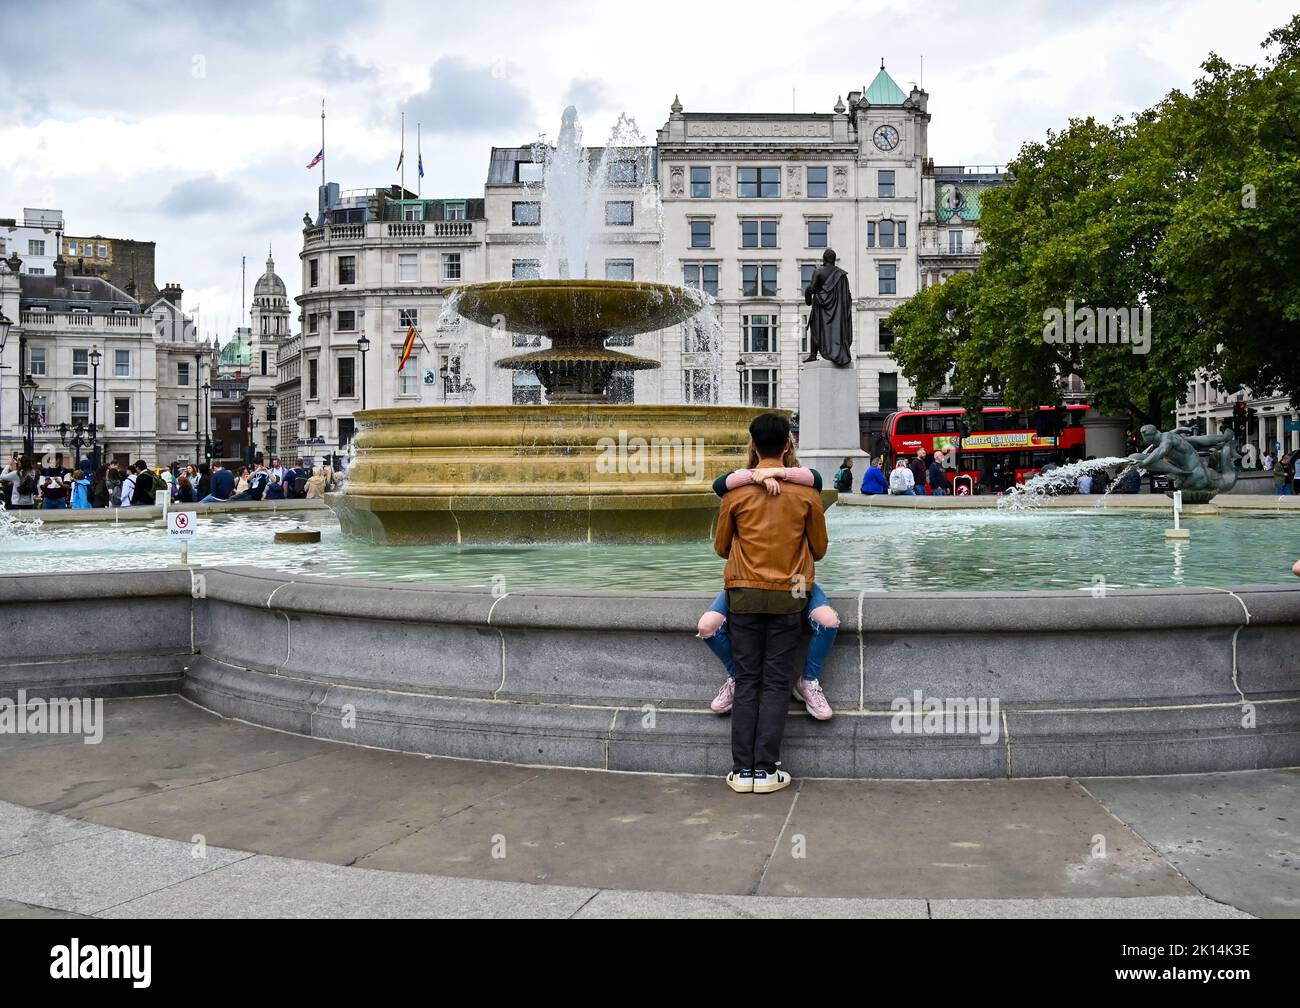 Trafalgar Square London UK - Paares together by one of the Fountains in the Square Photograph taken by Simon Dack Stockfoto